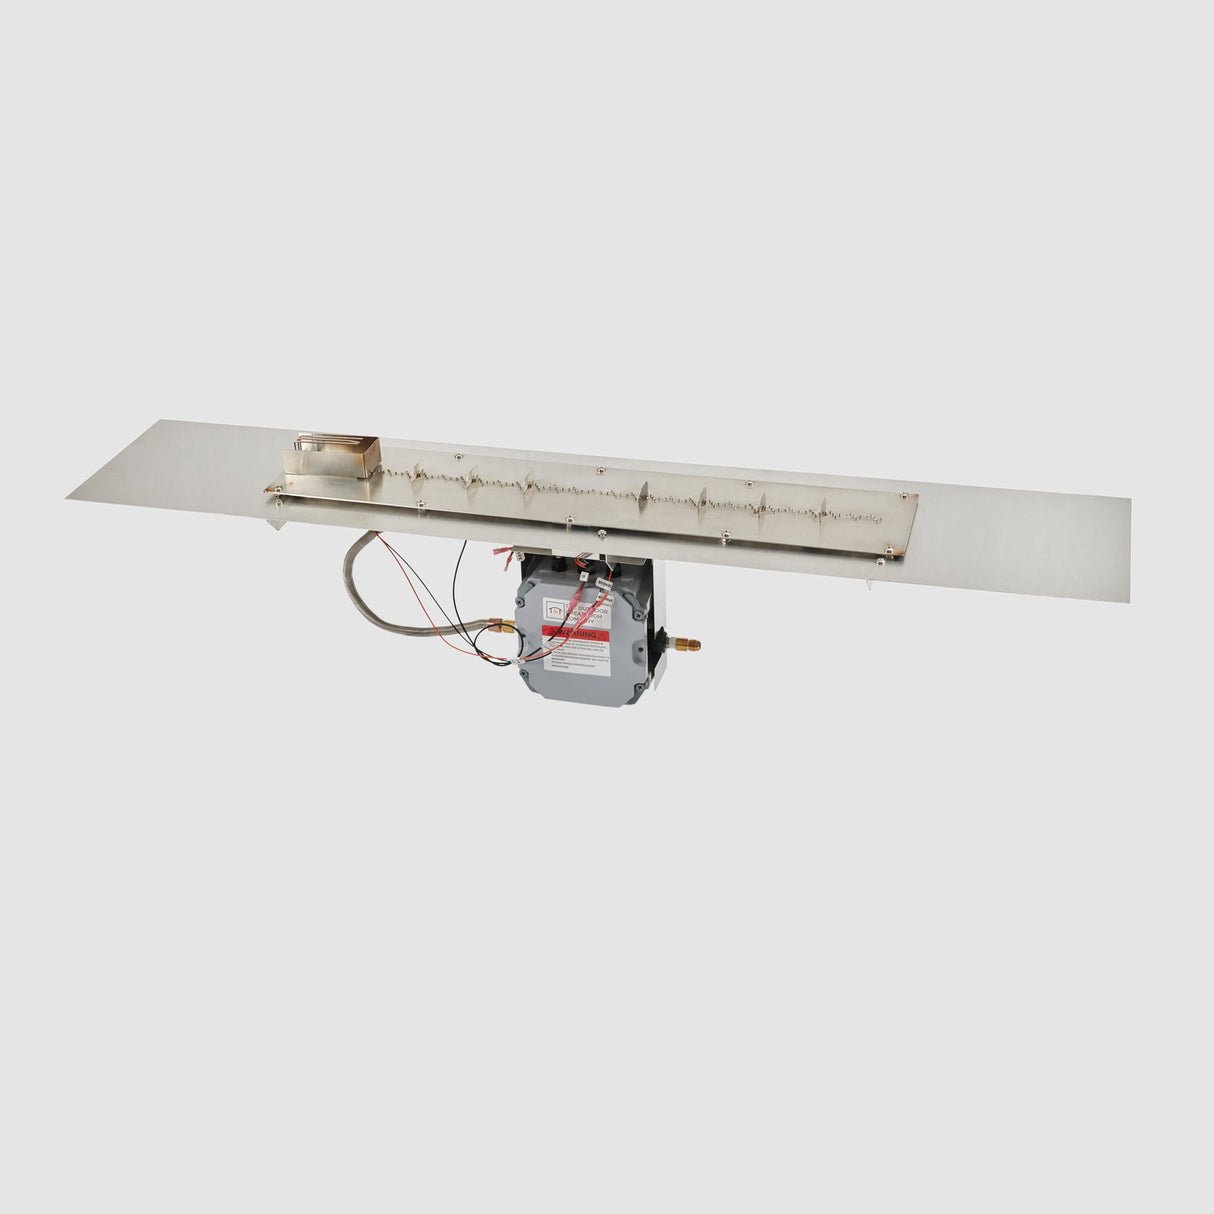 The 60" Crystal Fire Plus Linear Gas Burner Insert and Plate Kit with Direct Spark Ignition on a grey background